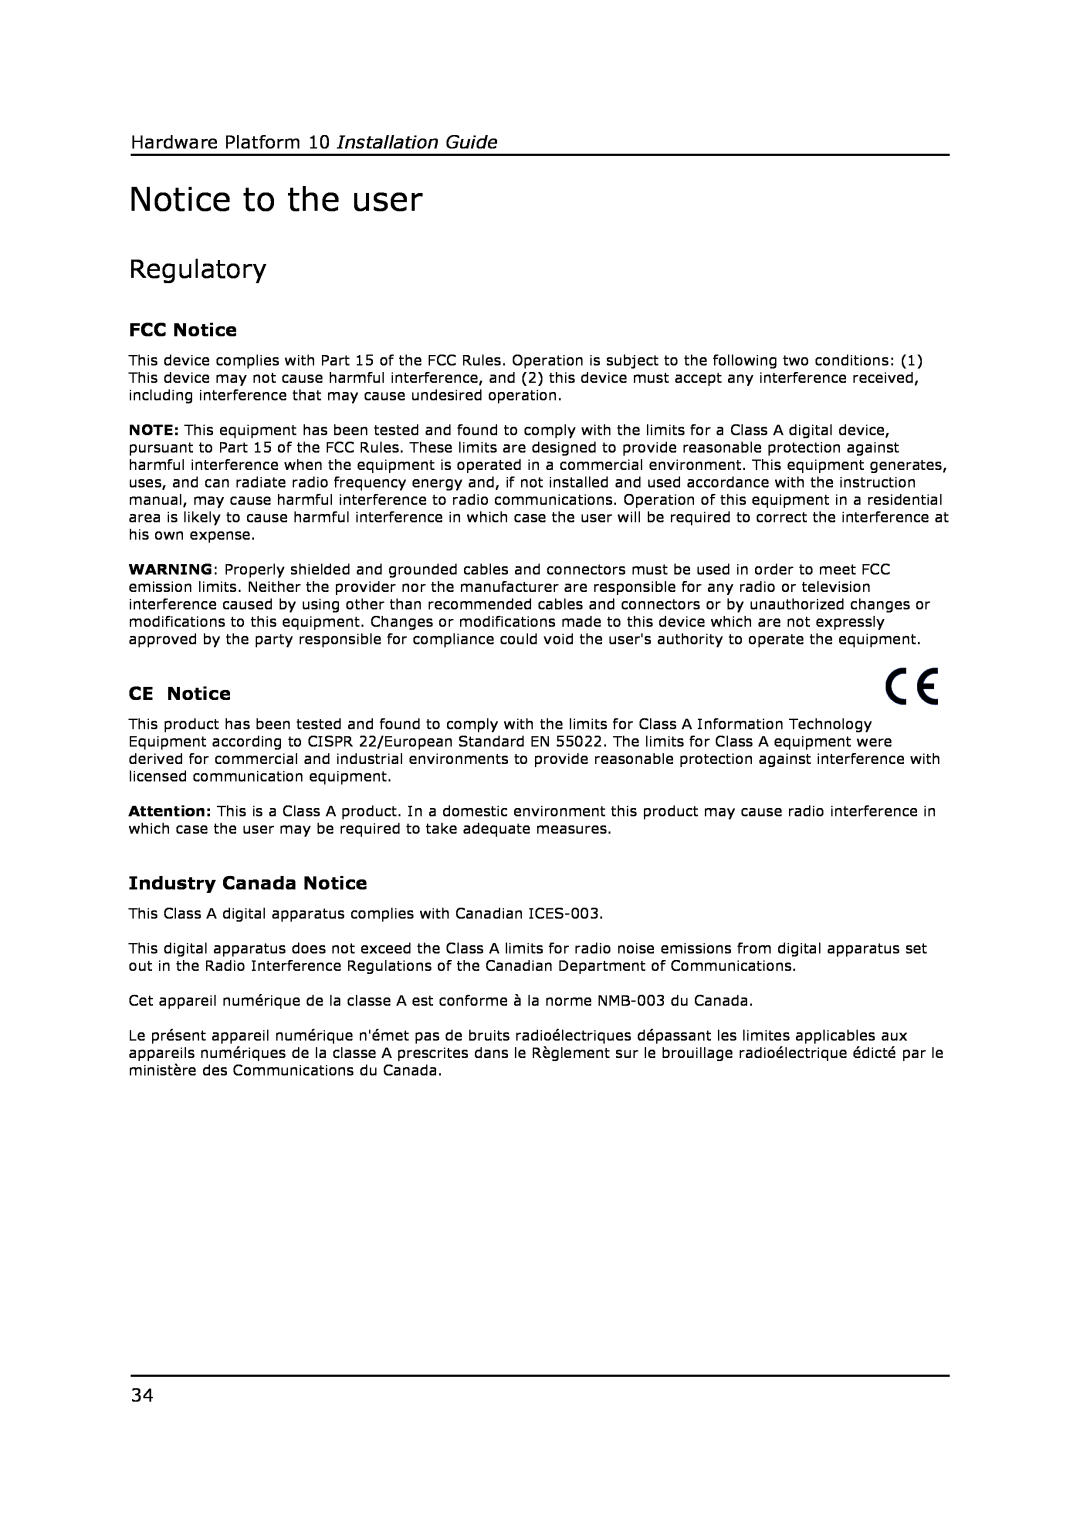 Field Controls 10 manual Notice to the user, Regulatory 